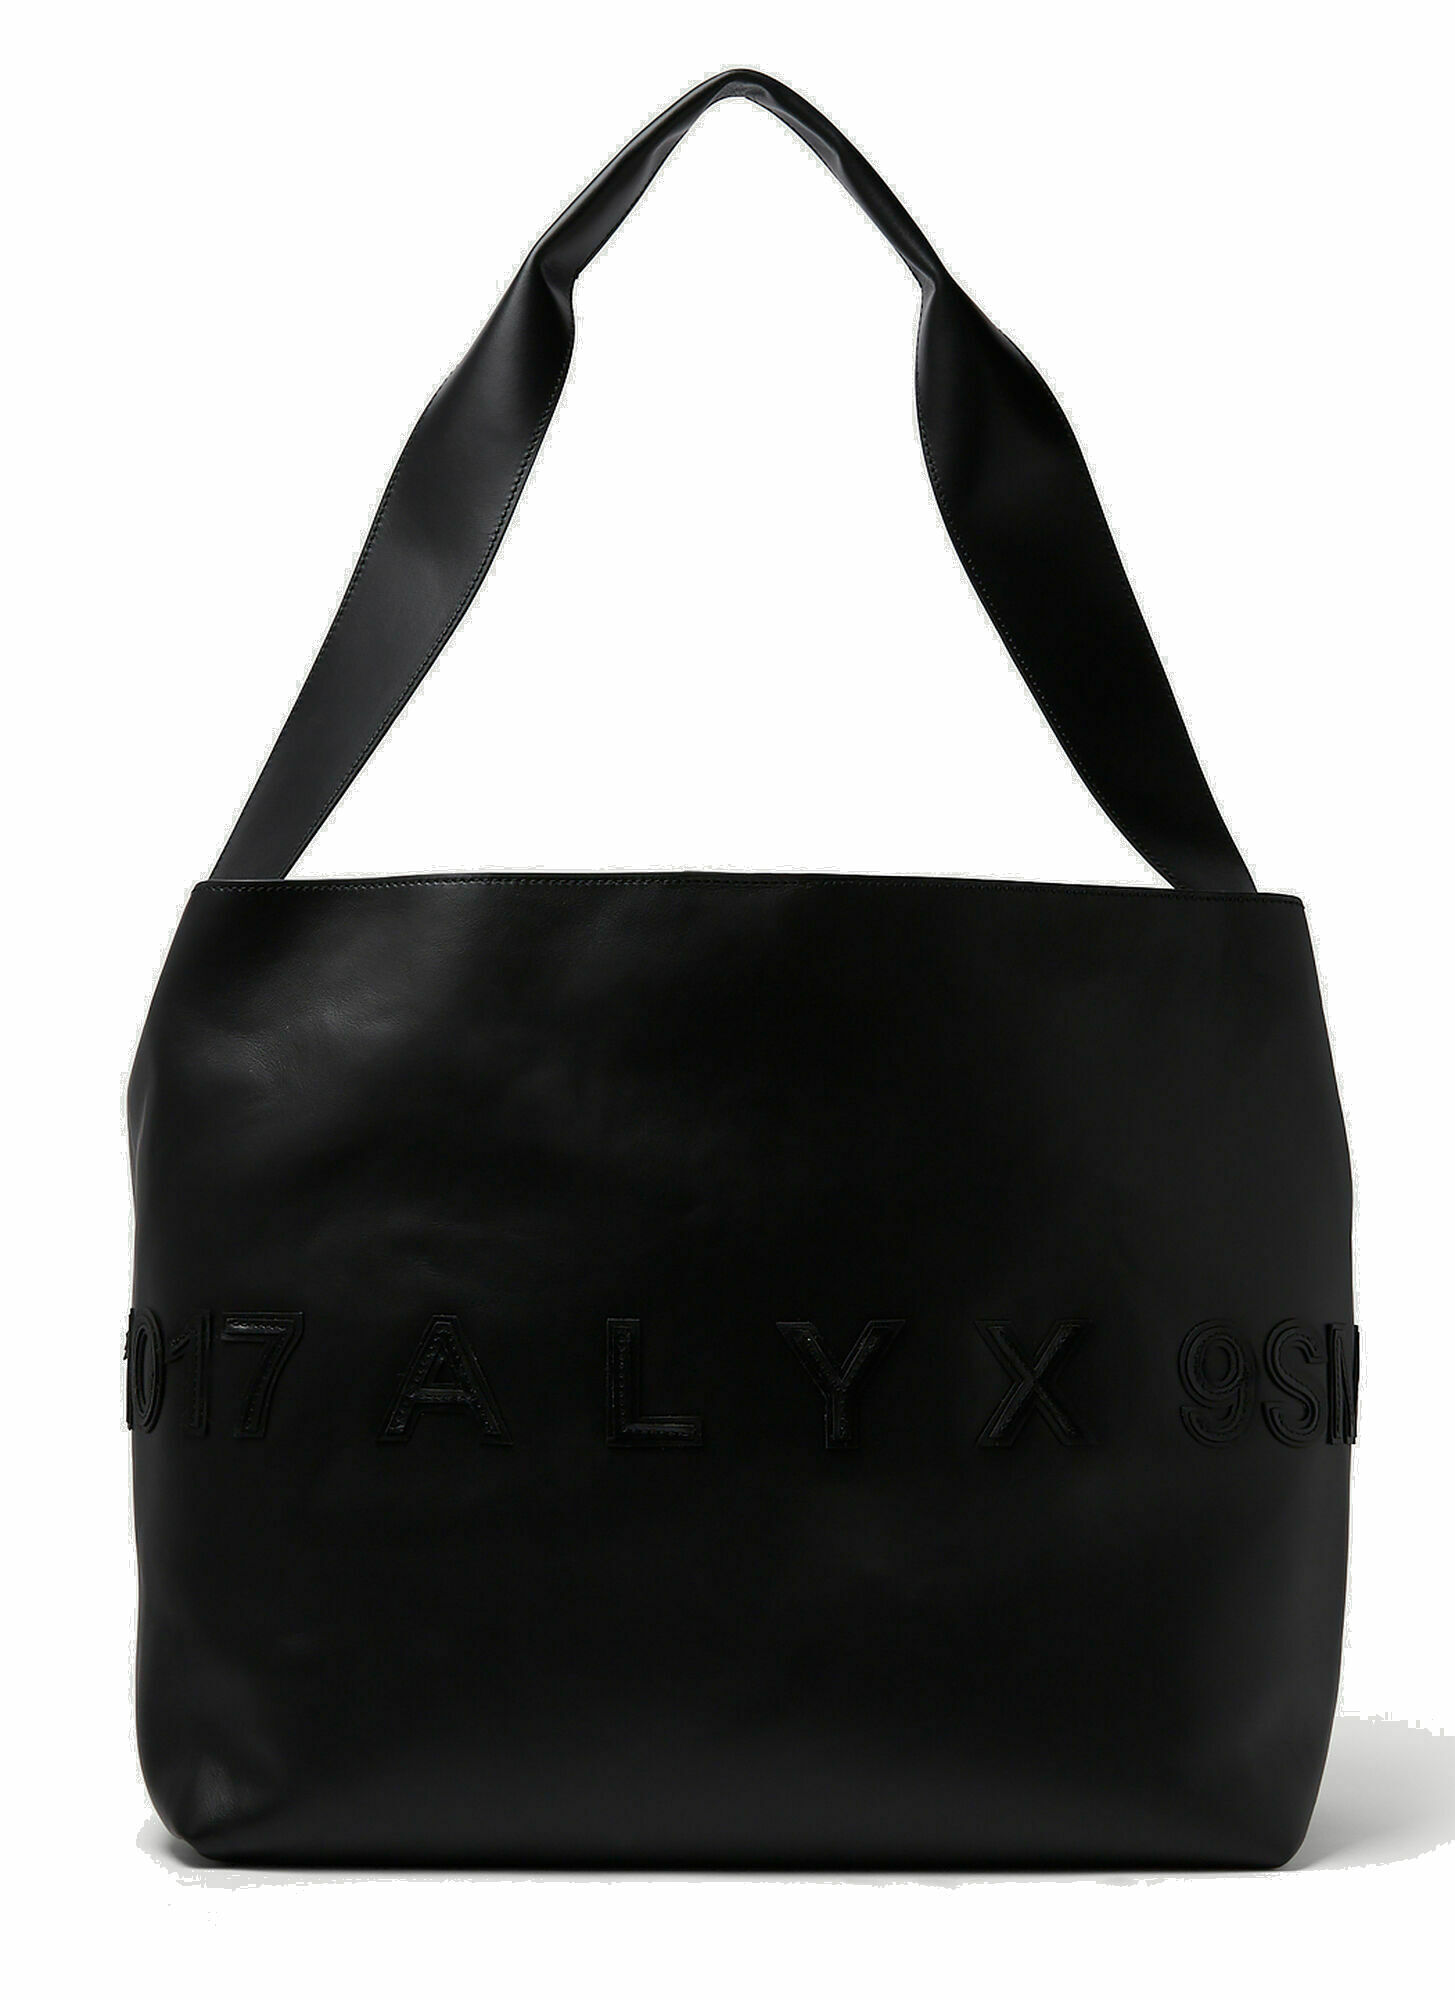 Photo: Constellation Tote Bag in Black